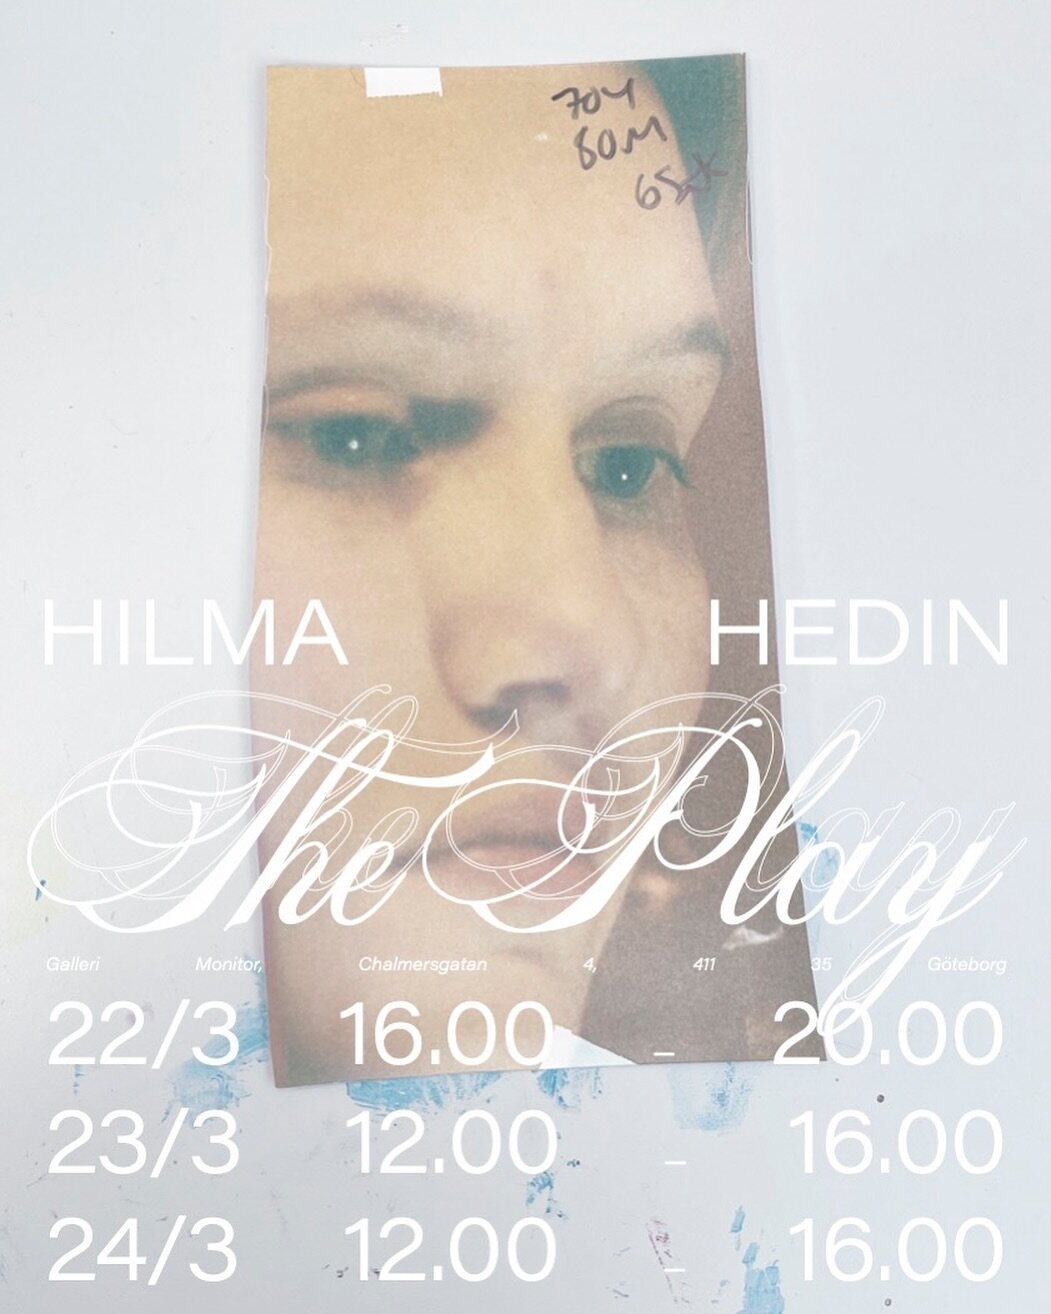 Hilma Hedin is currently pursuing her bachelors degree in fine art photography at HDK-Valand in Gothenburg. Through the staged photograph, Hedin explores human behaviors and interaction. Her artistic practice touches up on childhood and has a close c